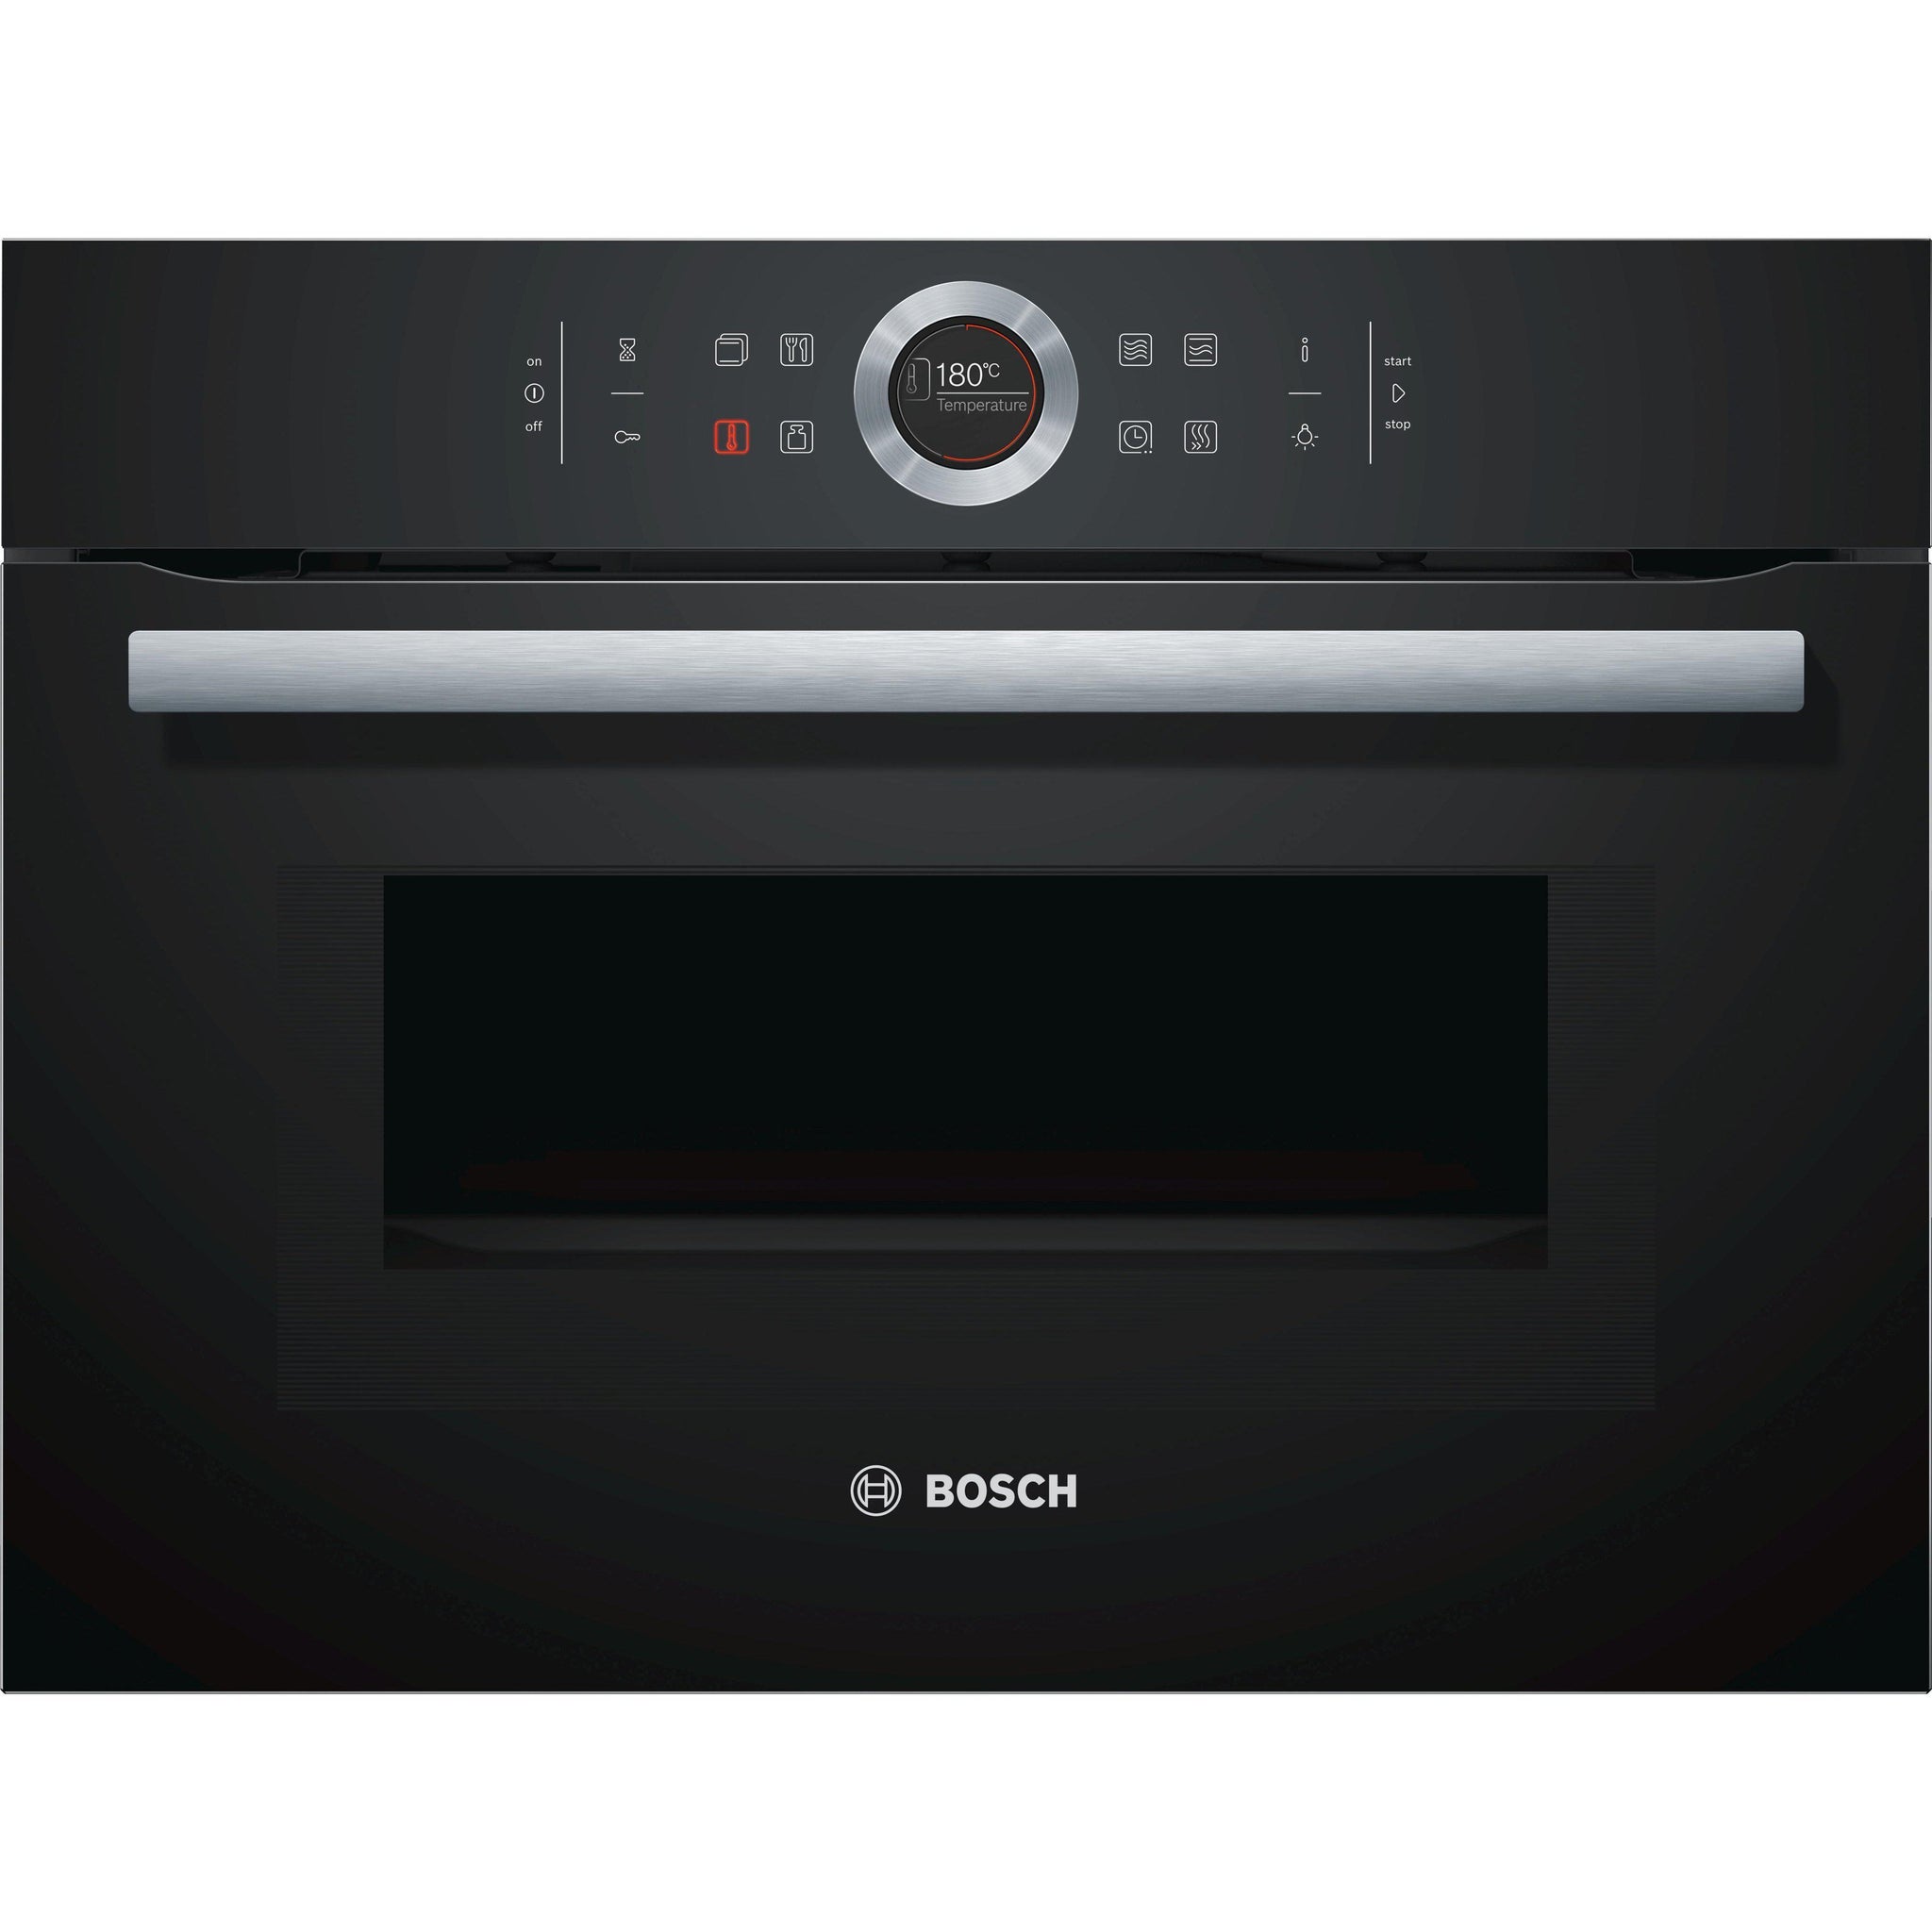 Bosch Series 8 Cmg633bb1b Builtin Compact Combination Oven Delivery Within 5 Days